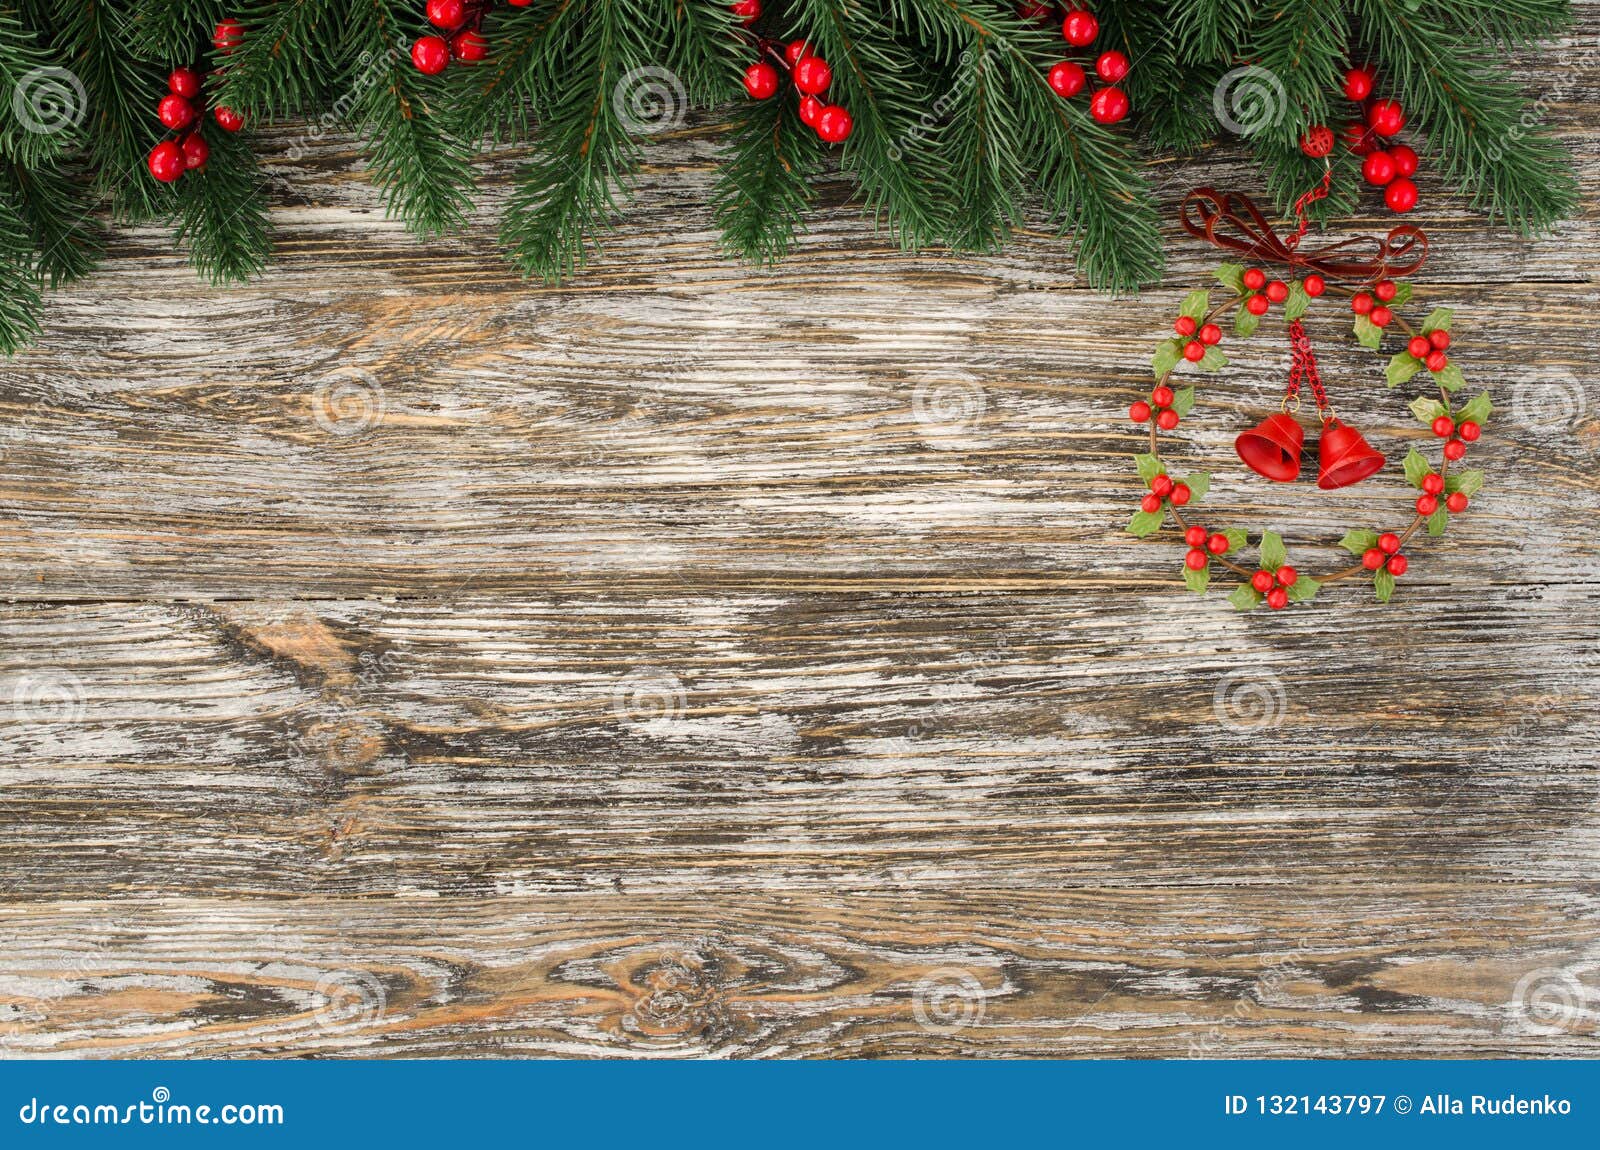 Christmas and New Year Wooden Background with Fir Tree in Rustic Style ...